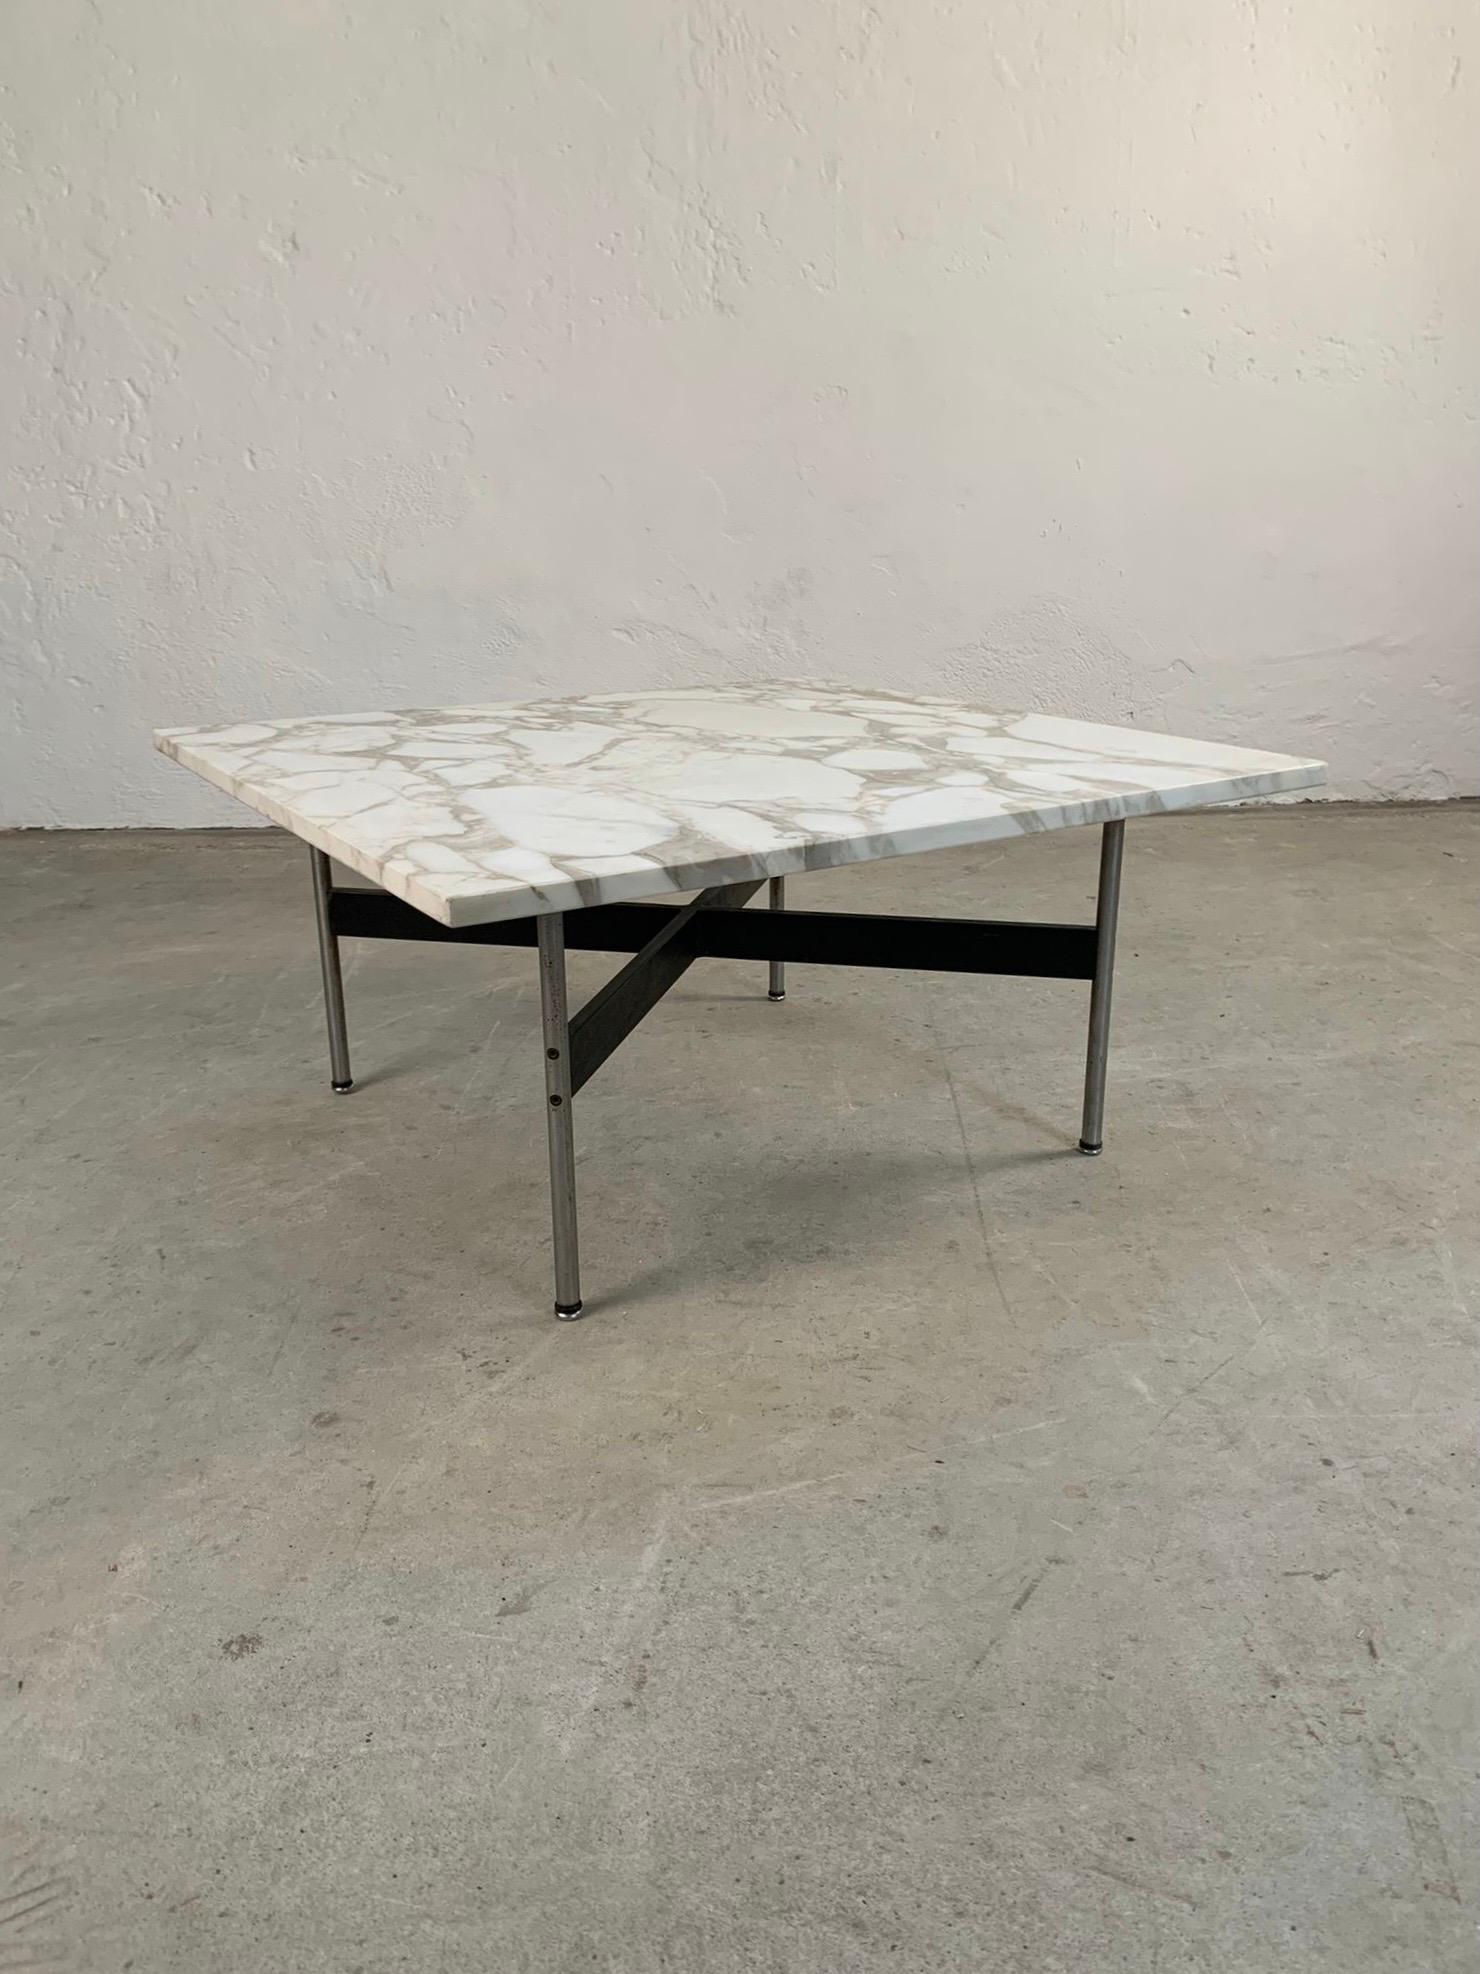 Metal and marble low table by W. Katavolos, R. Little and D. Kelley manufactured by Icf, 1970s

low table with metal frame and Calacatta gold marble top. 

Good condition,  signs of time.

Measurements 83 x 83 x 39.5 h cm 